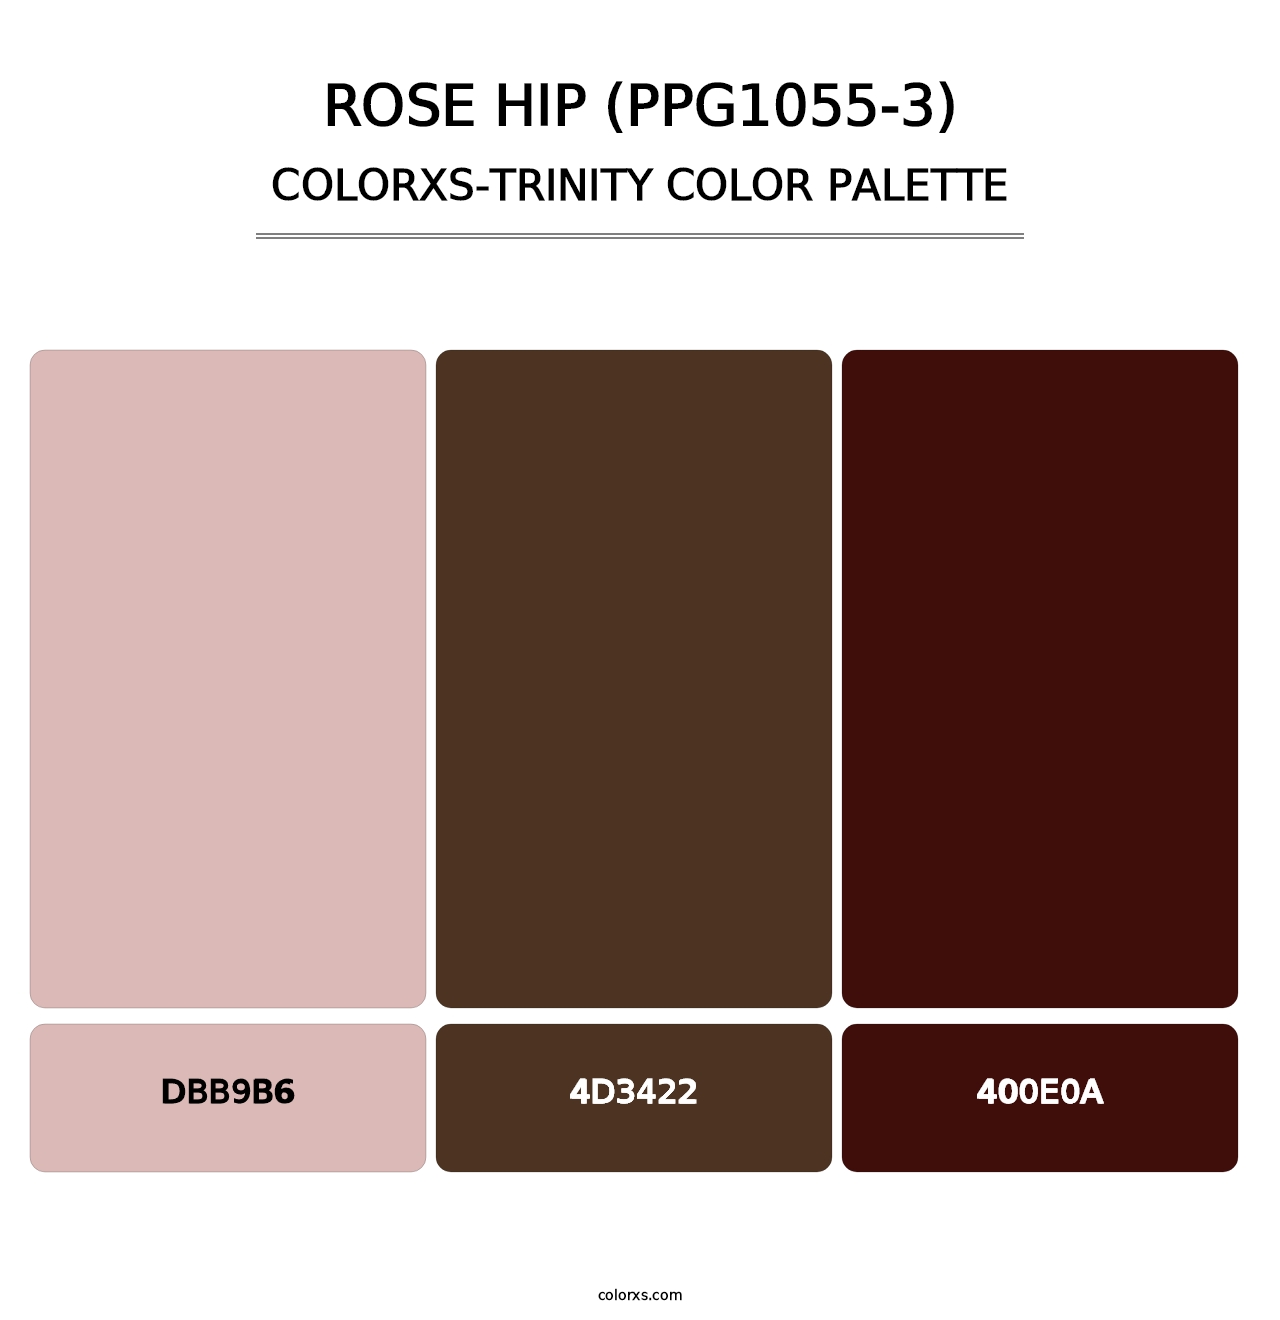 Rose Hip (PPG1055-3) - Colorxs Trinity Palette